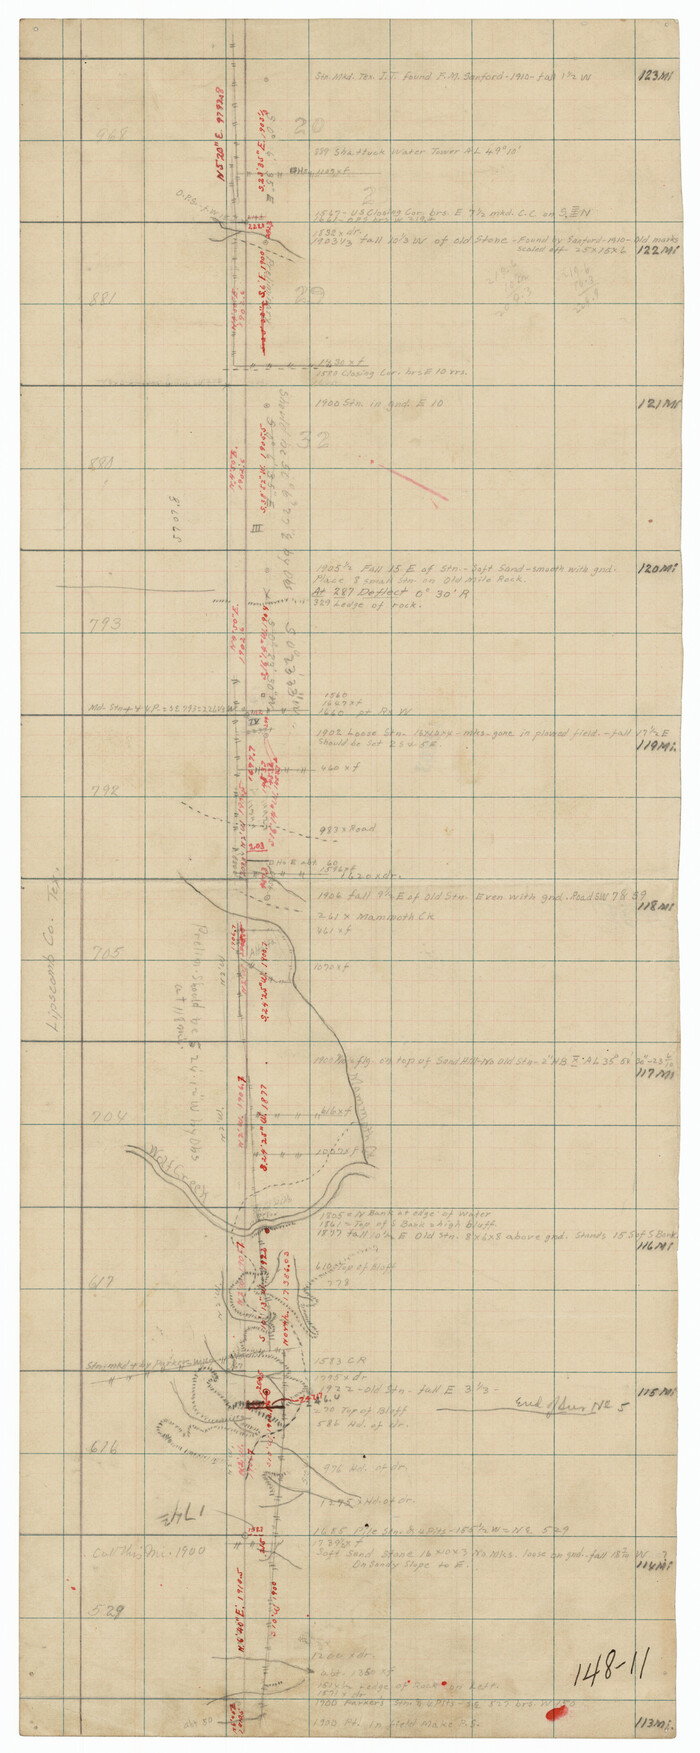 91318, East Line of Lipscomb County, Twichell Survey Records